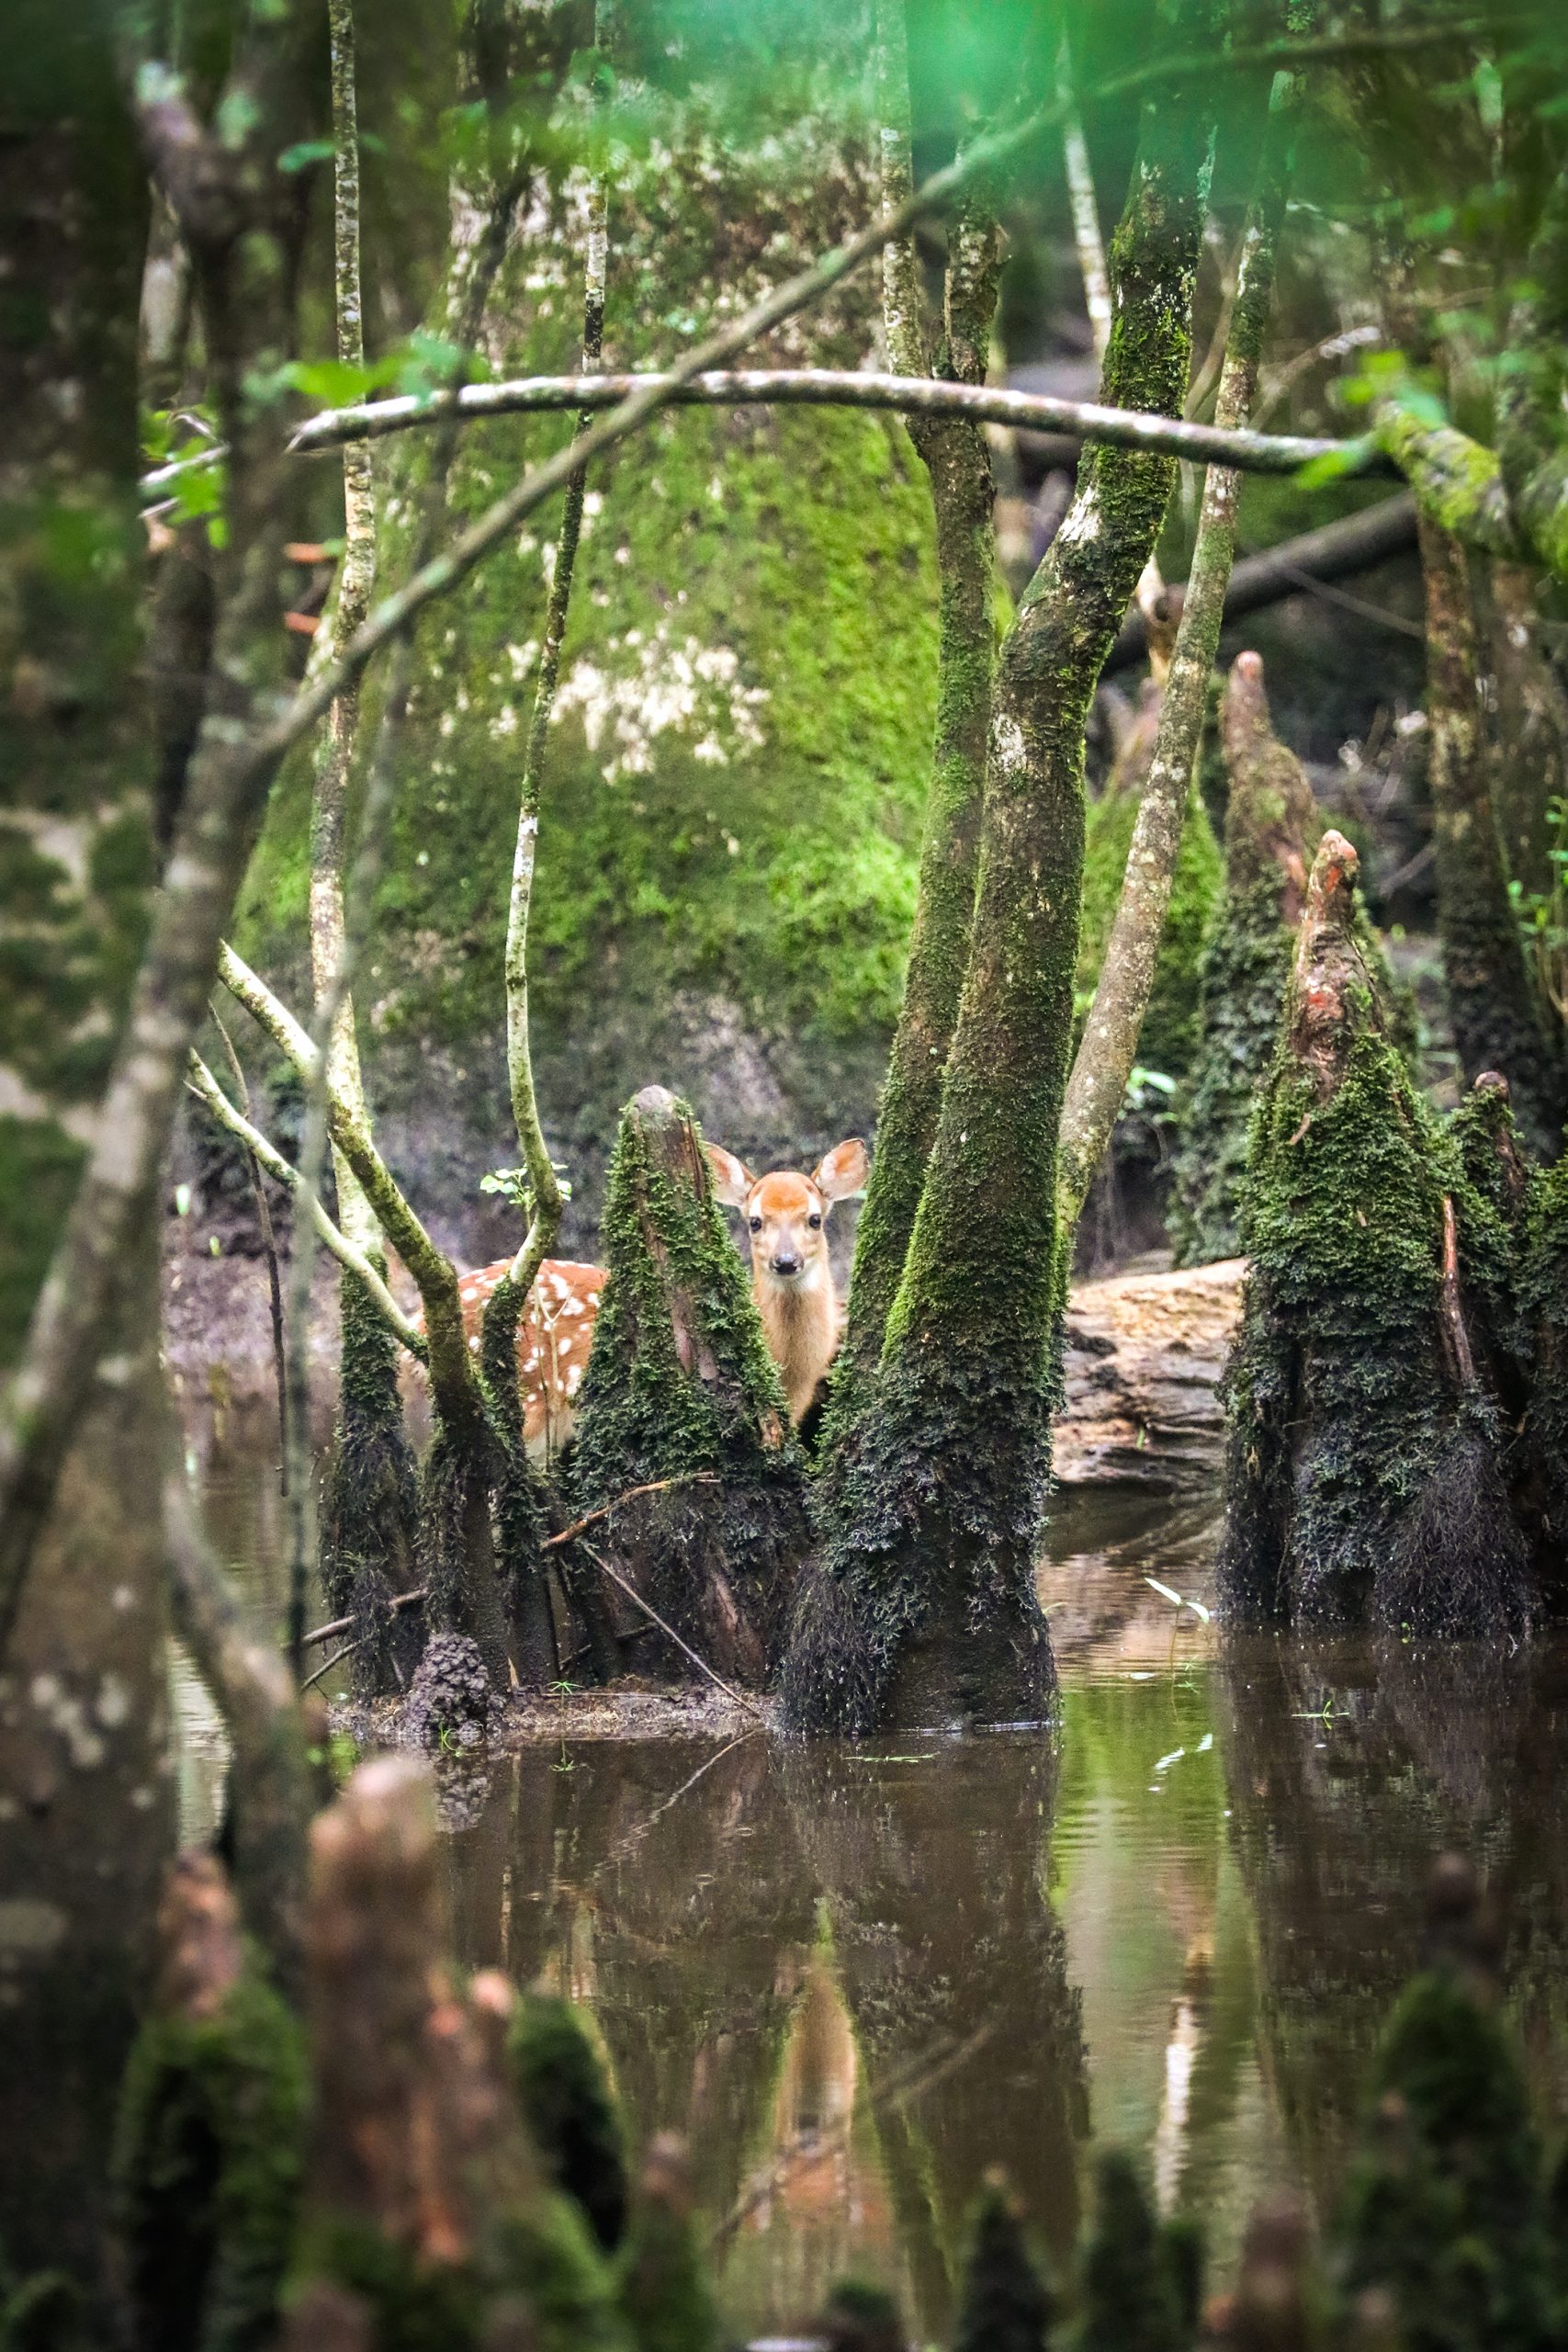 A young fawn peers from behind cypress tree knees. Wildlife finds Congaree Park to be an excellent refuge to raise their young without disturbances from man and development.  Photography courtesy of Janice Sauls